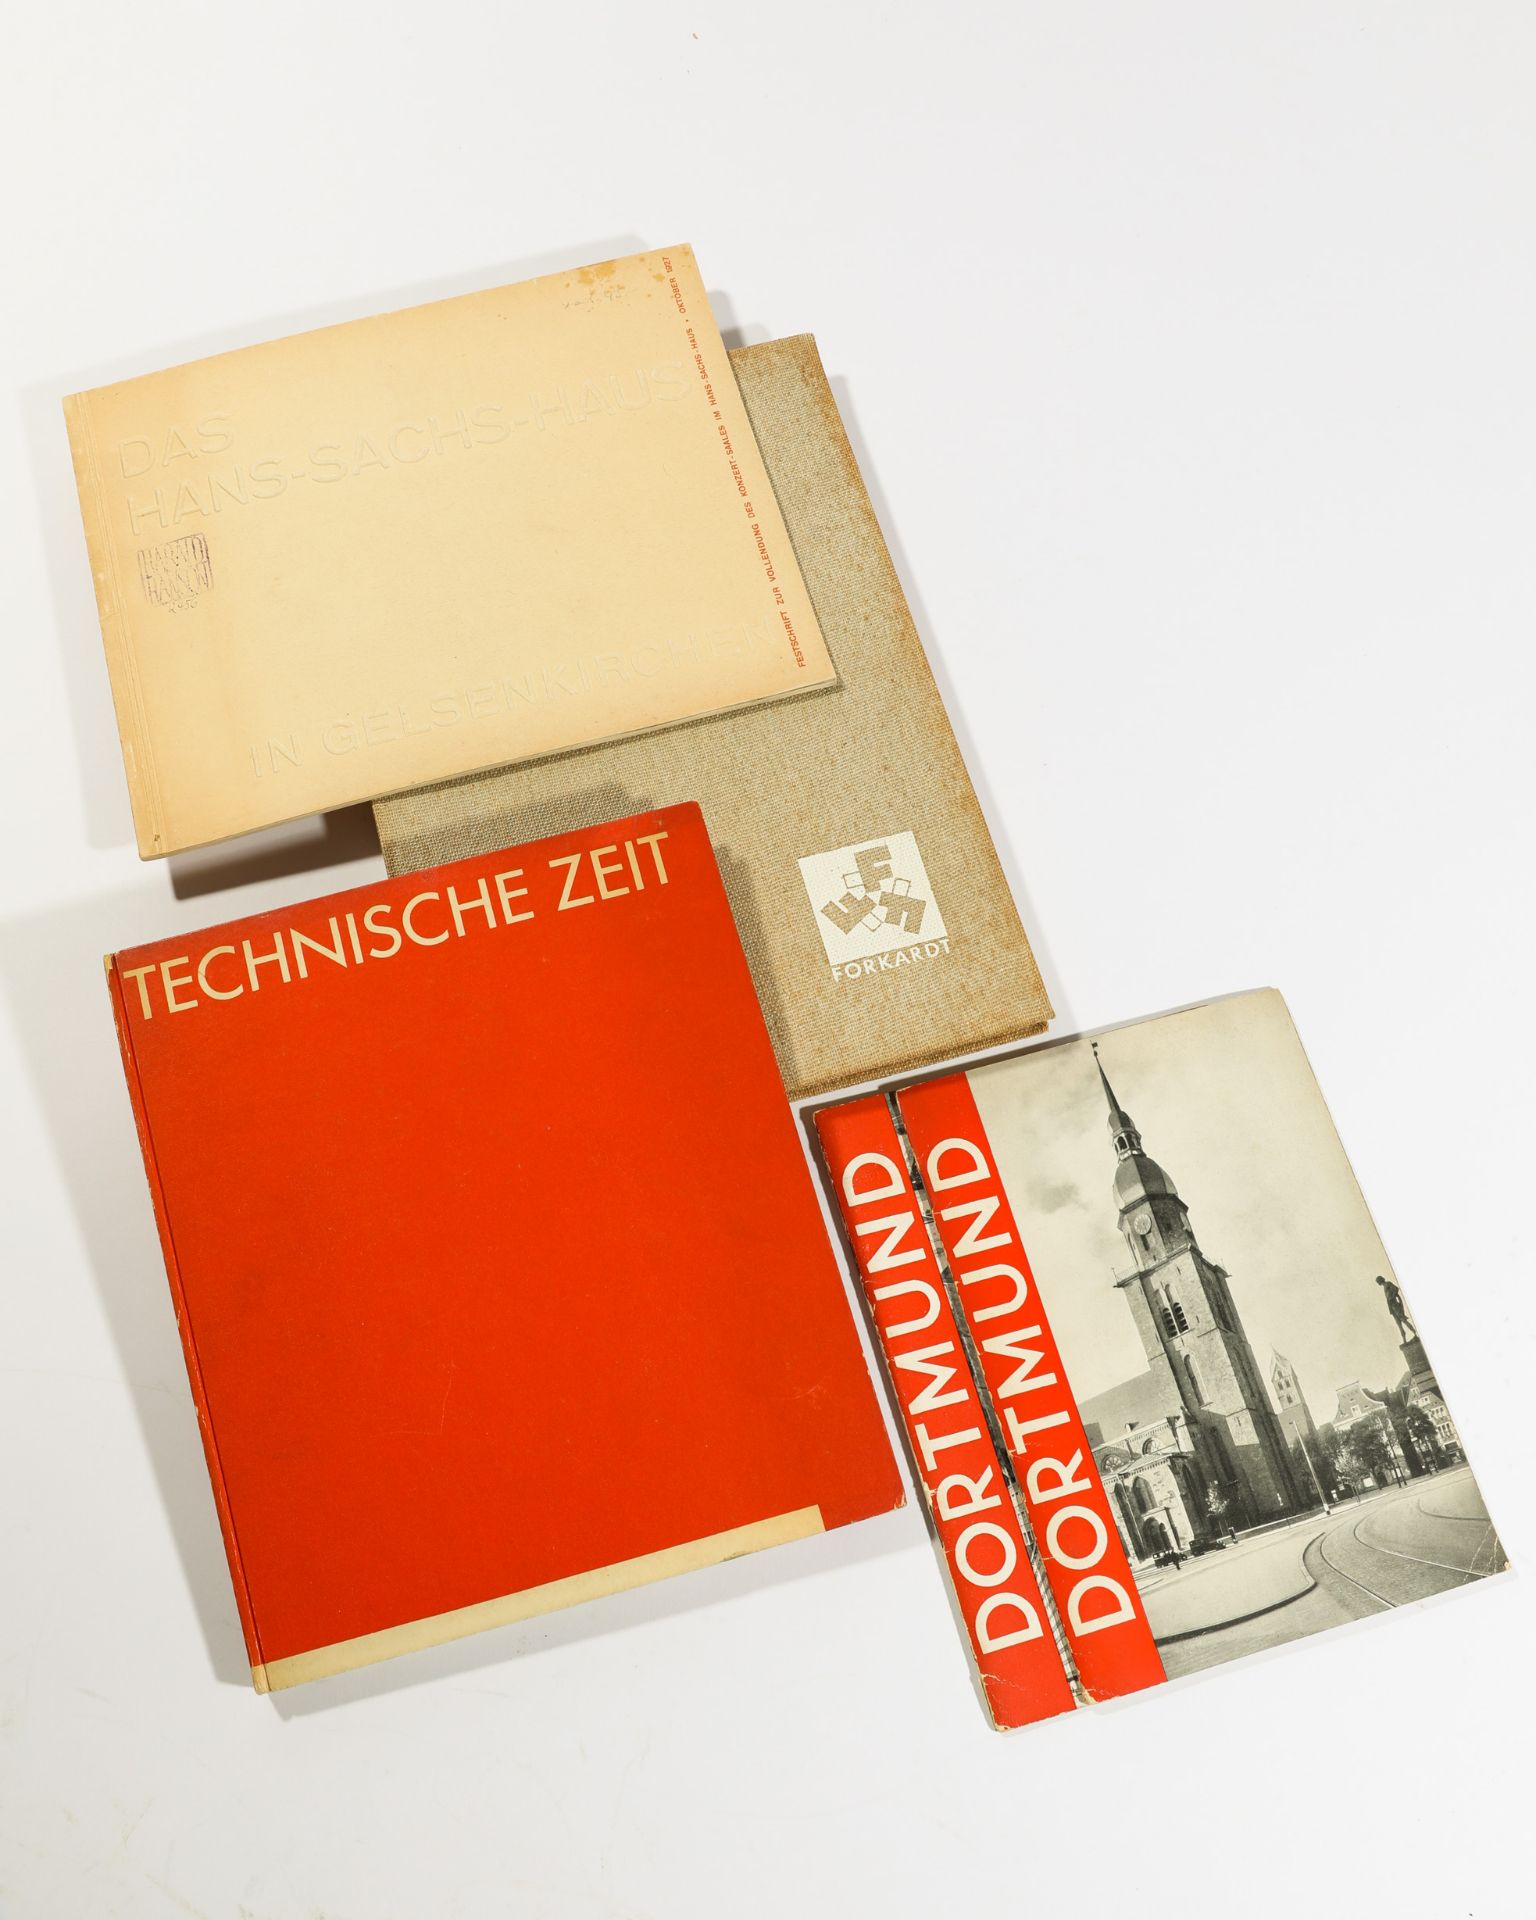 Max Burchartz, 6 Books/ Typographies after his designs